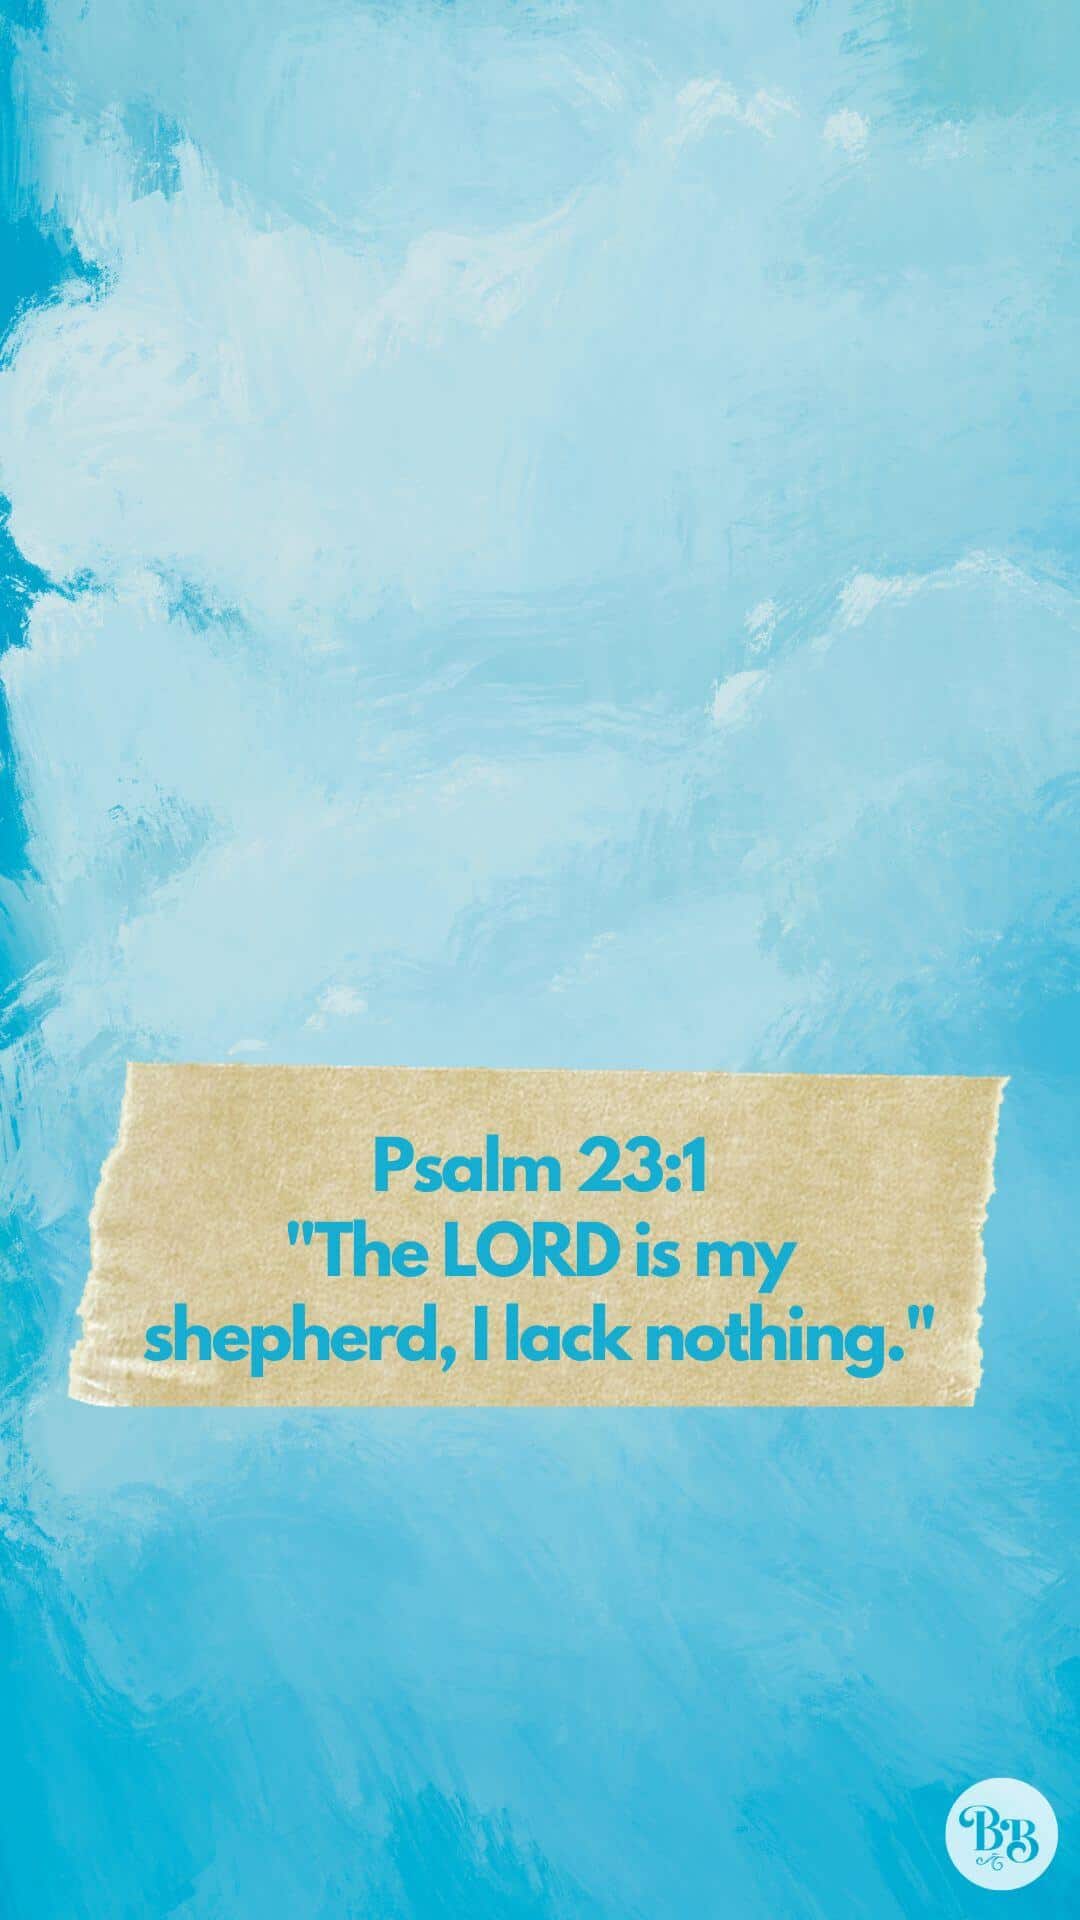 Psalm 23:1: "The LORD is my shepherd, I lack nothing."